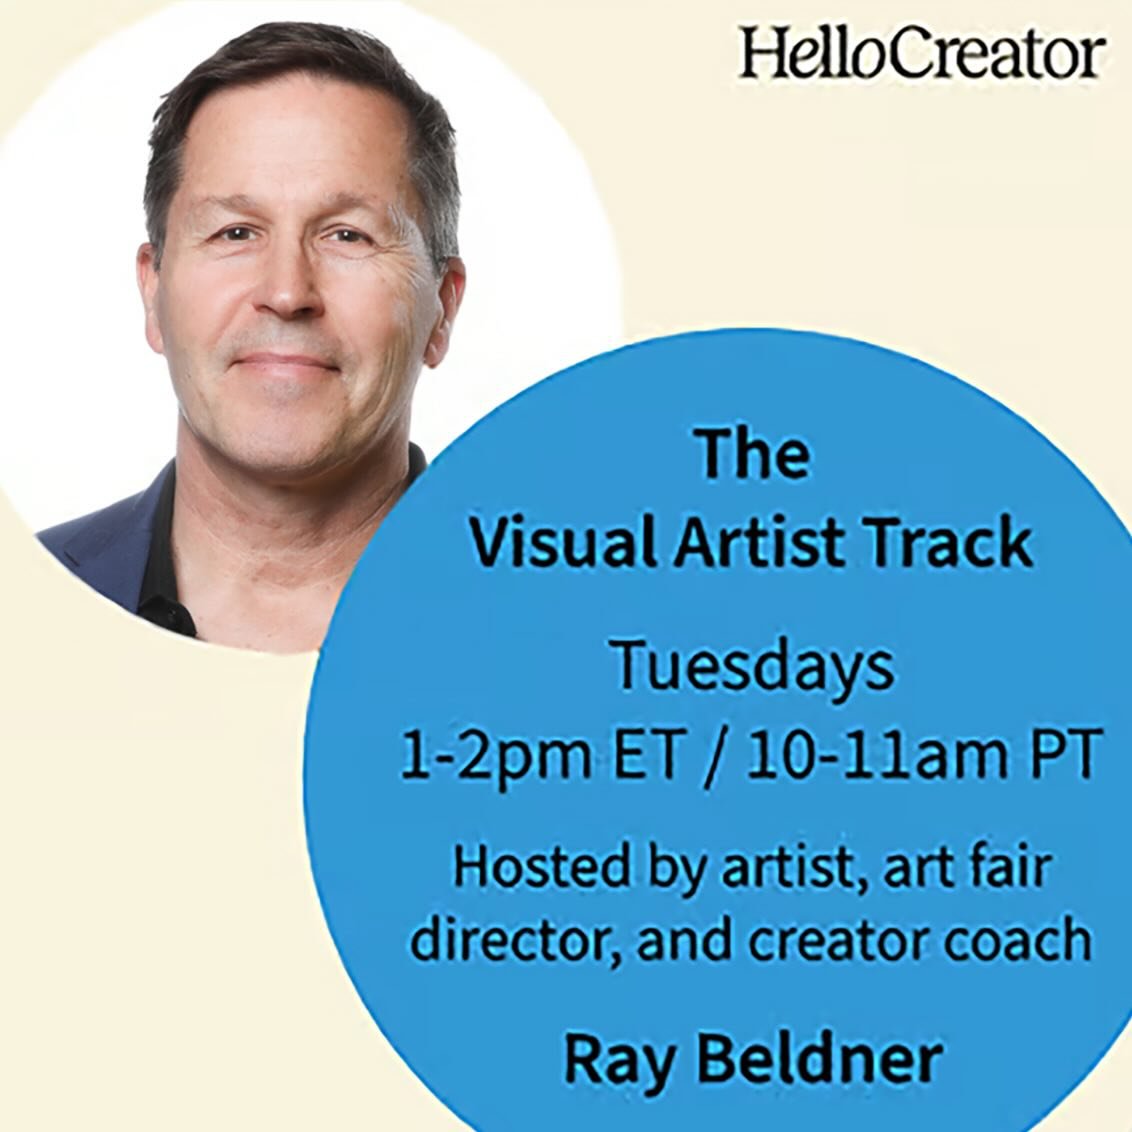 Do you need a little support? Then come check out the HelloCreator&rsquo;s Artist Roundtable that I&rsquo;ll be hosting every Tuesday at 10am PST.

What challenges are you facing in your art practice? What questions do you need answered? Let us help 